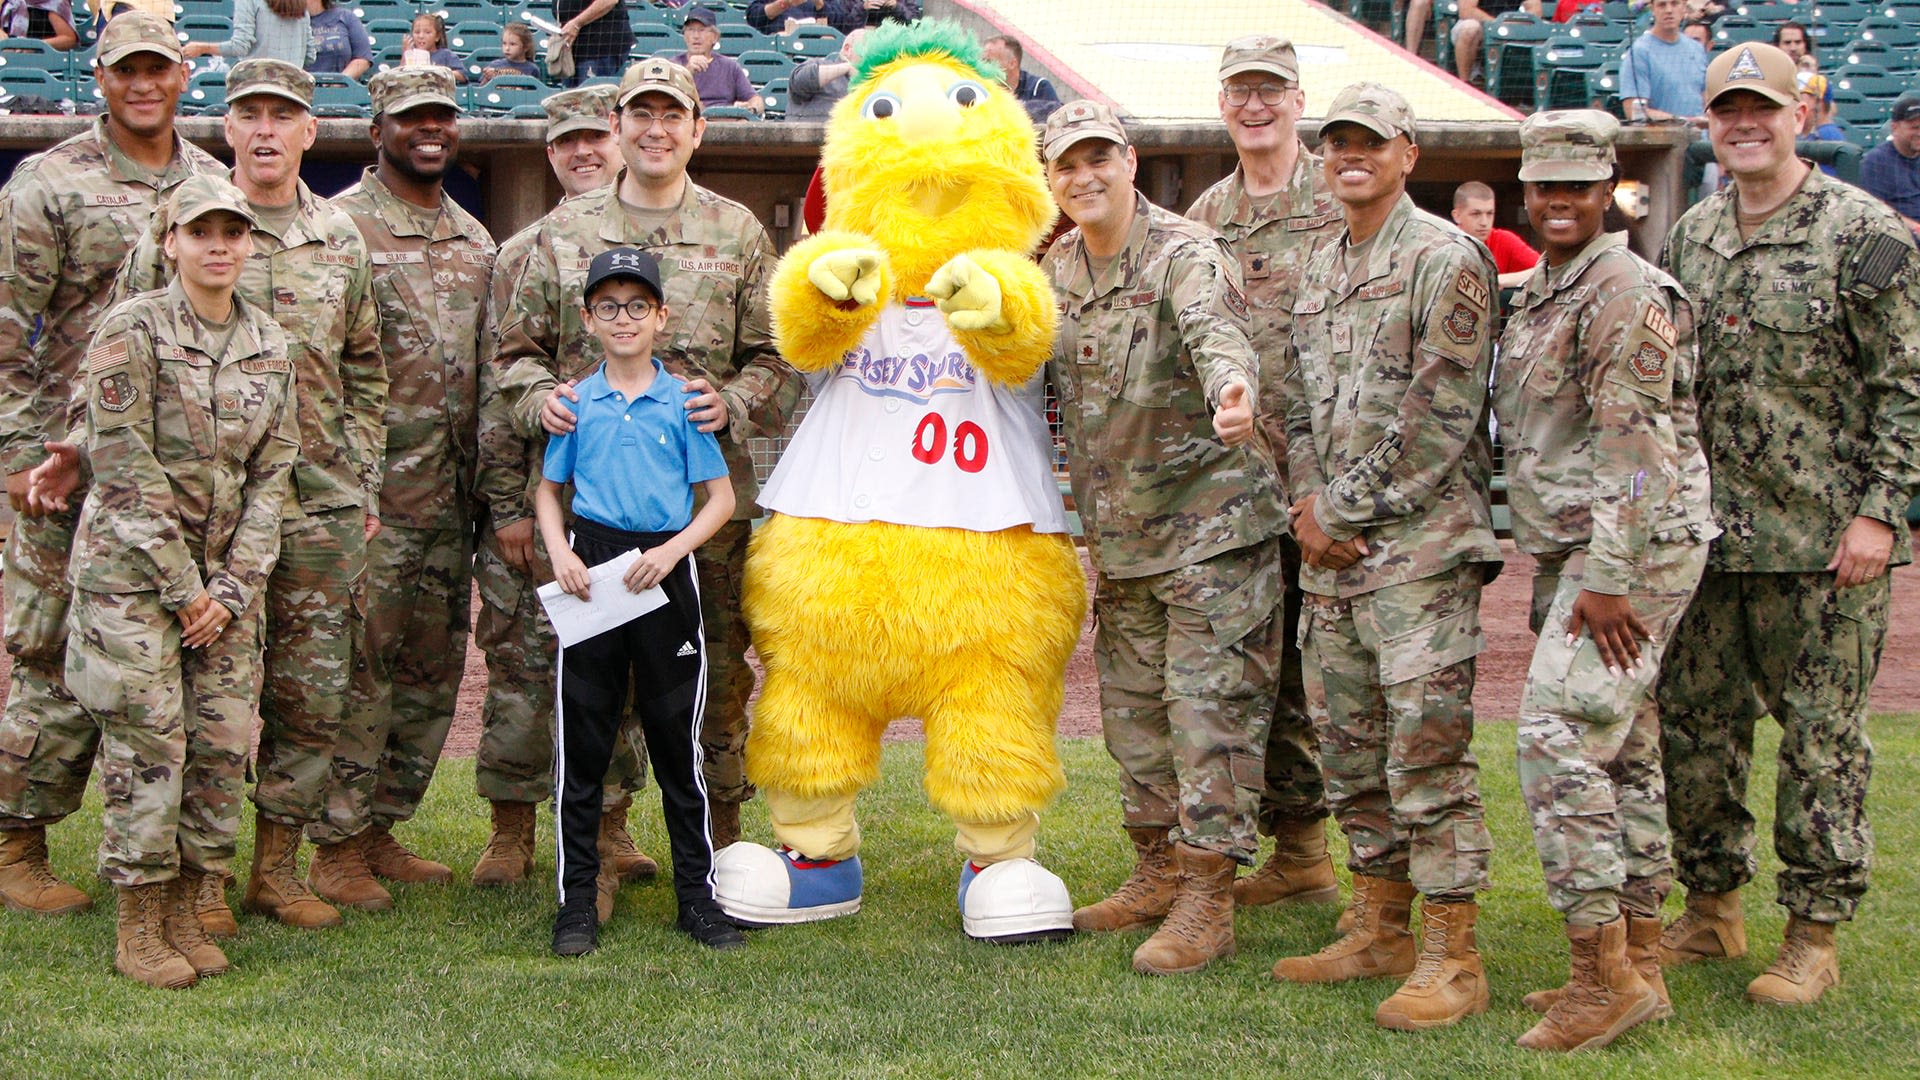 BlueClaws baseball for a good cause and more things to do this weekend at the Shore